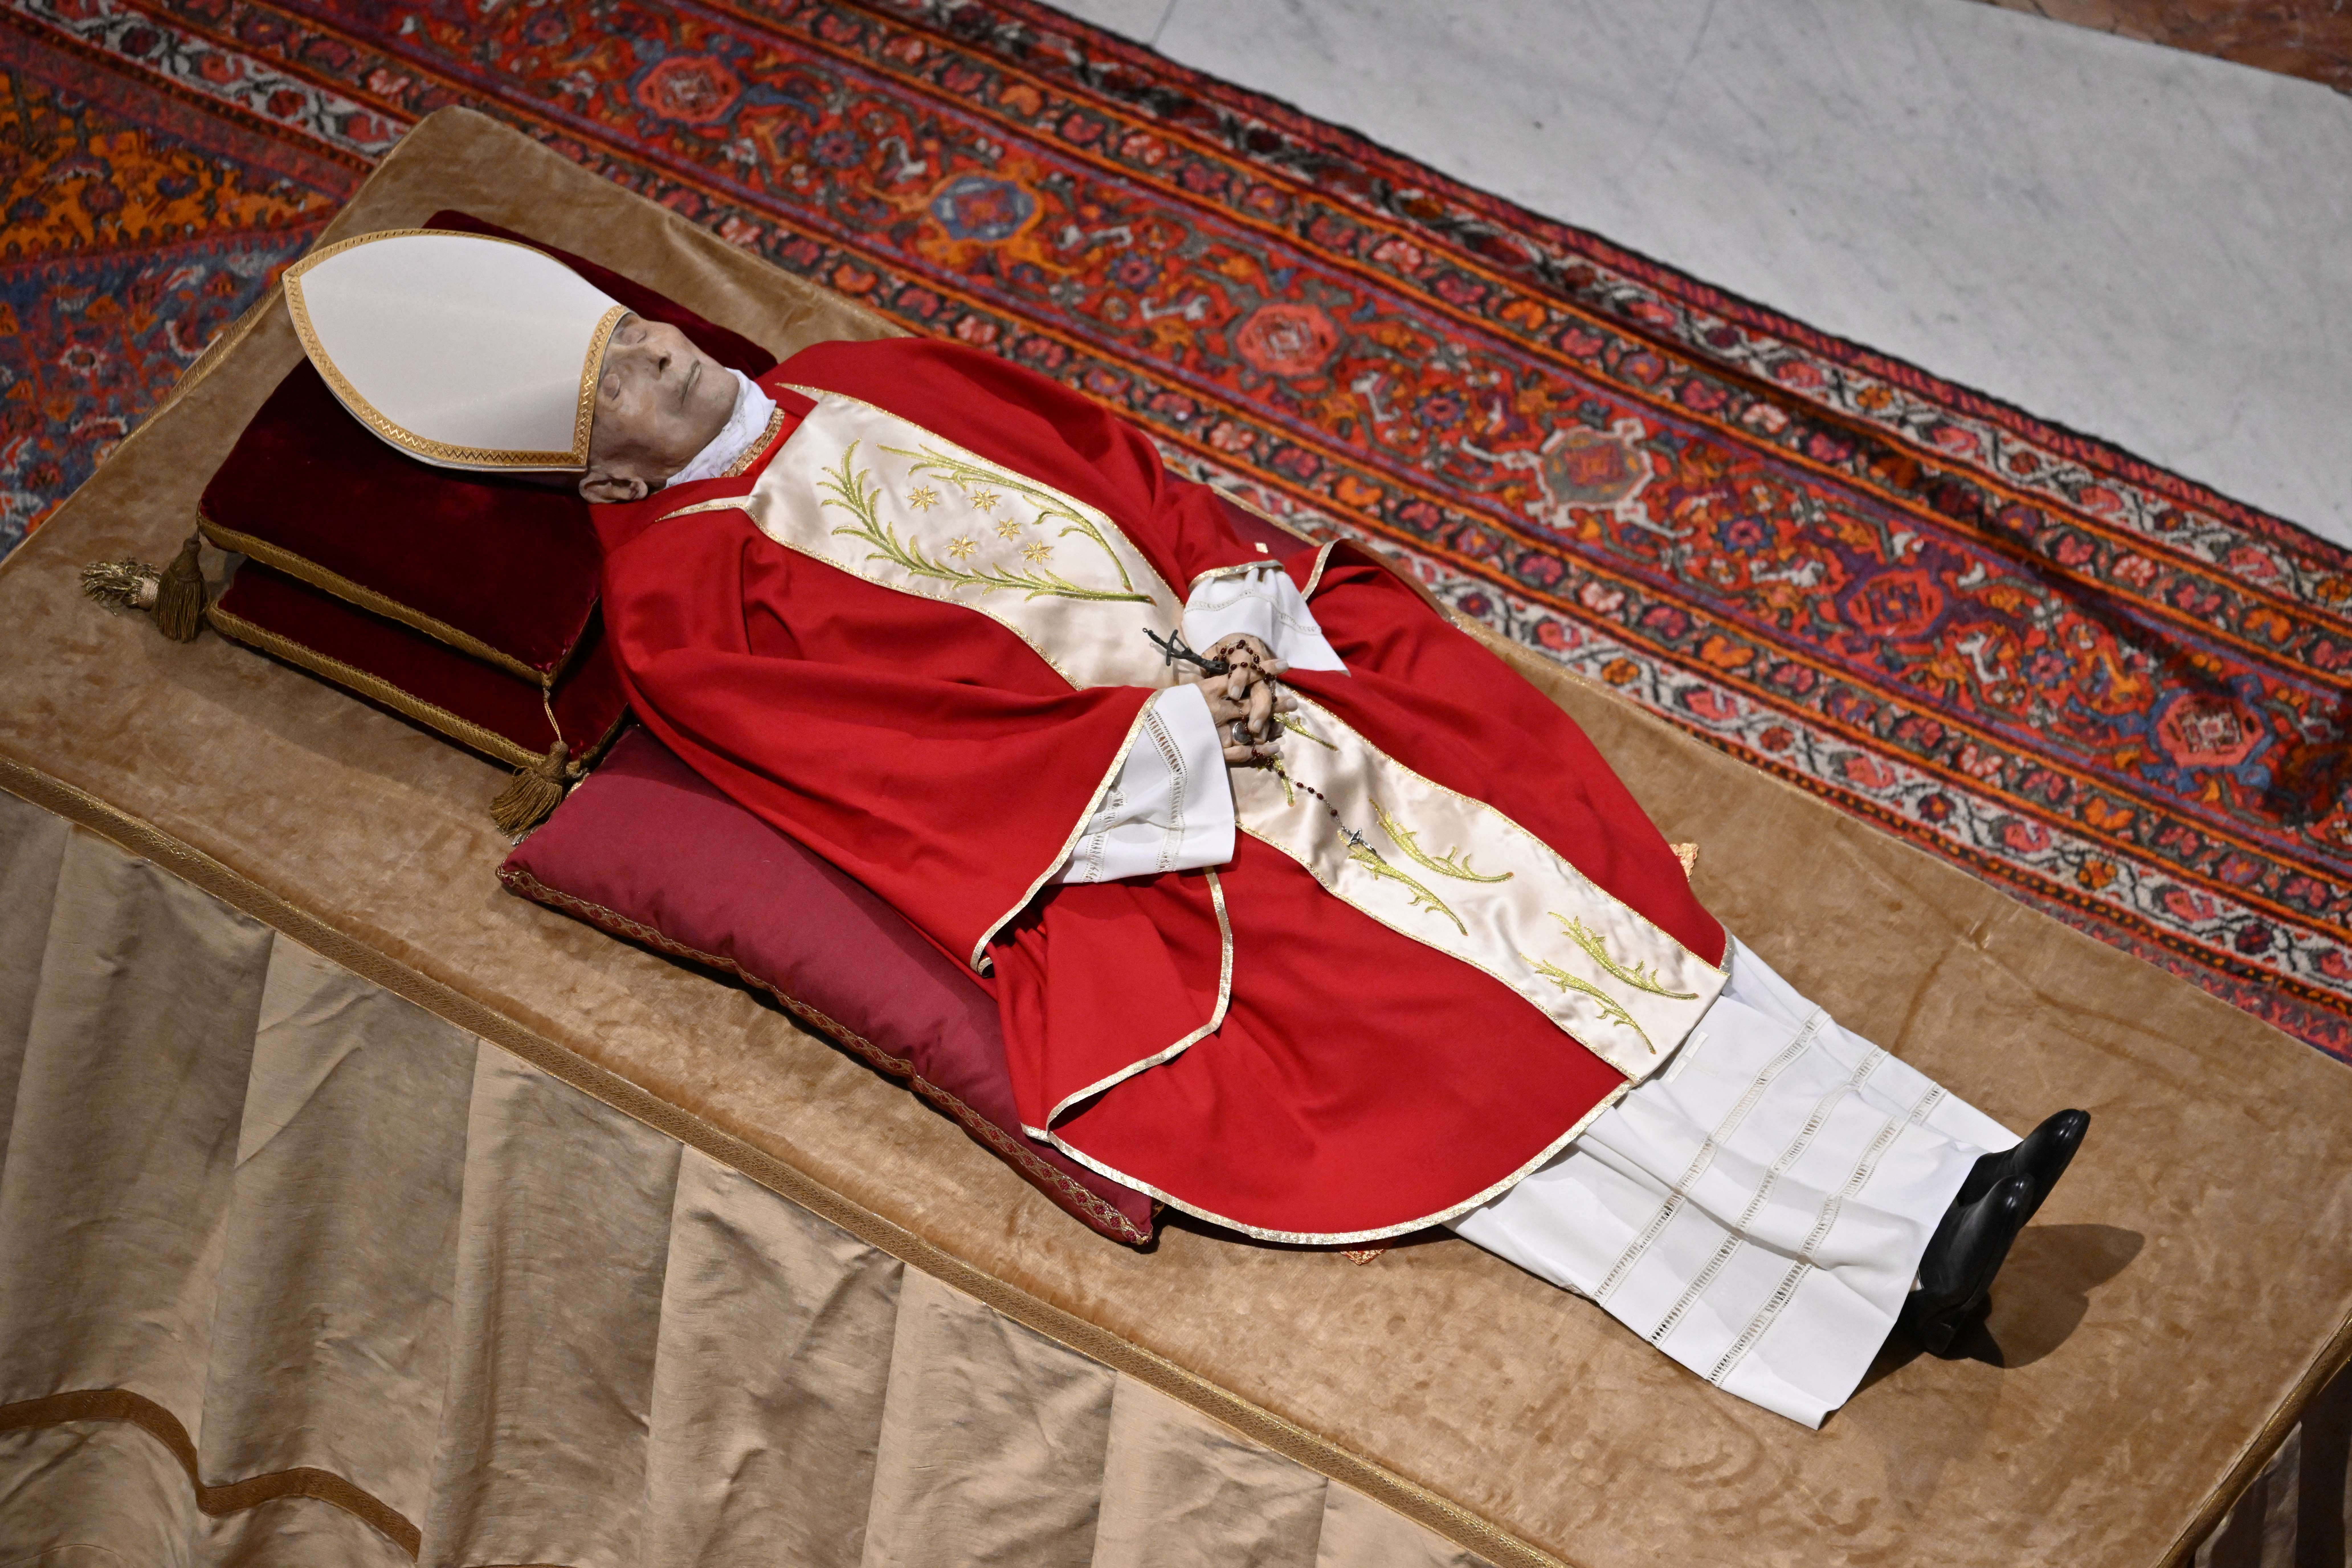 The story behind Pope Benedict XVI's red shoes